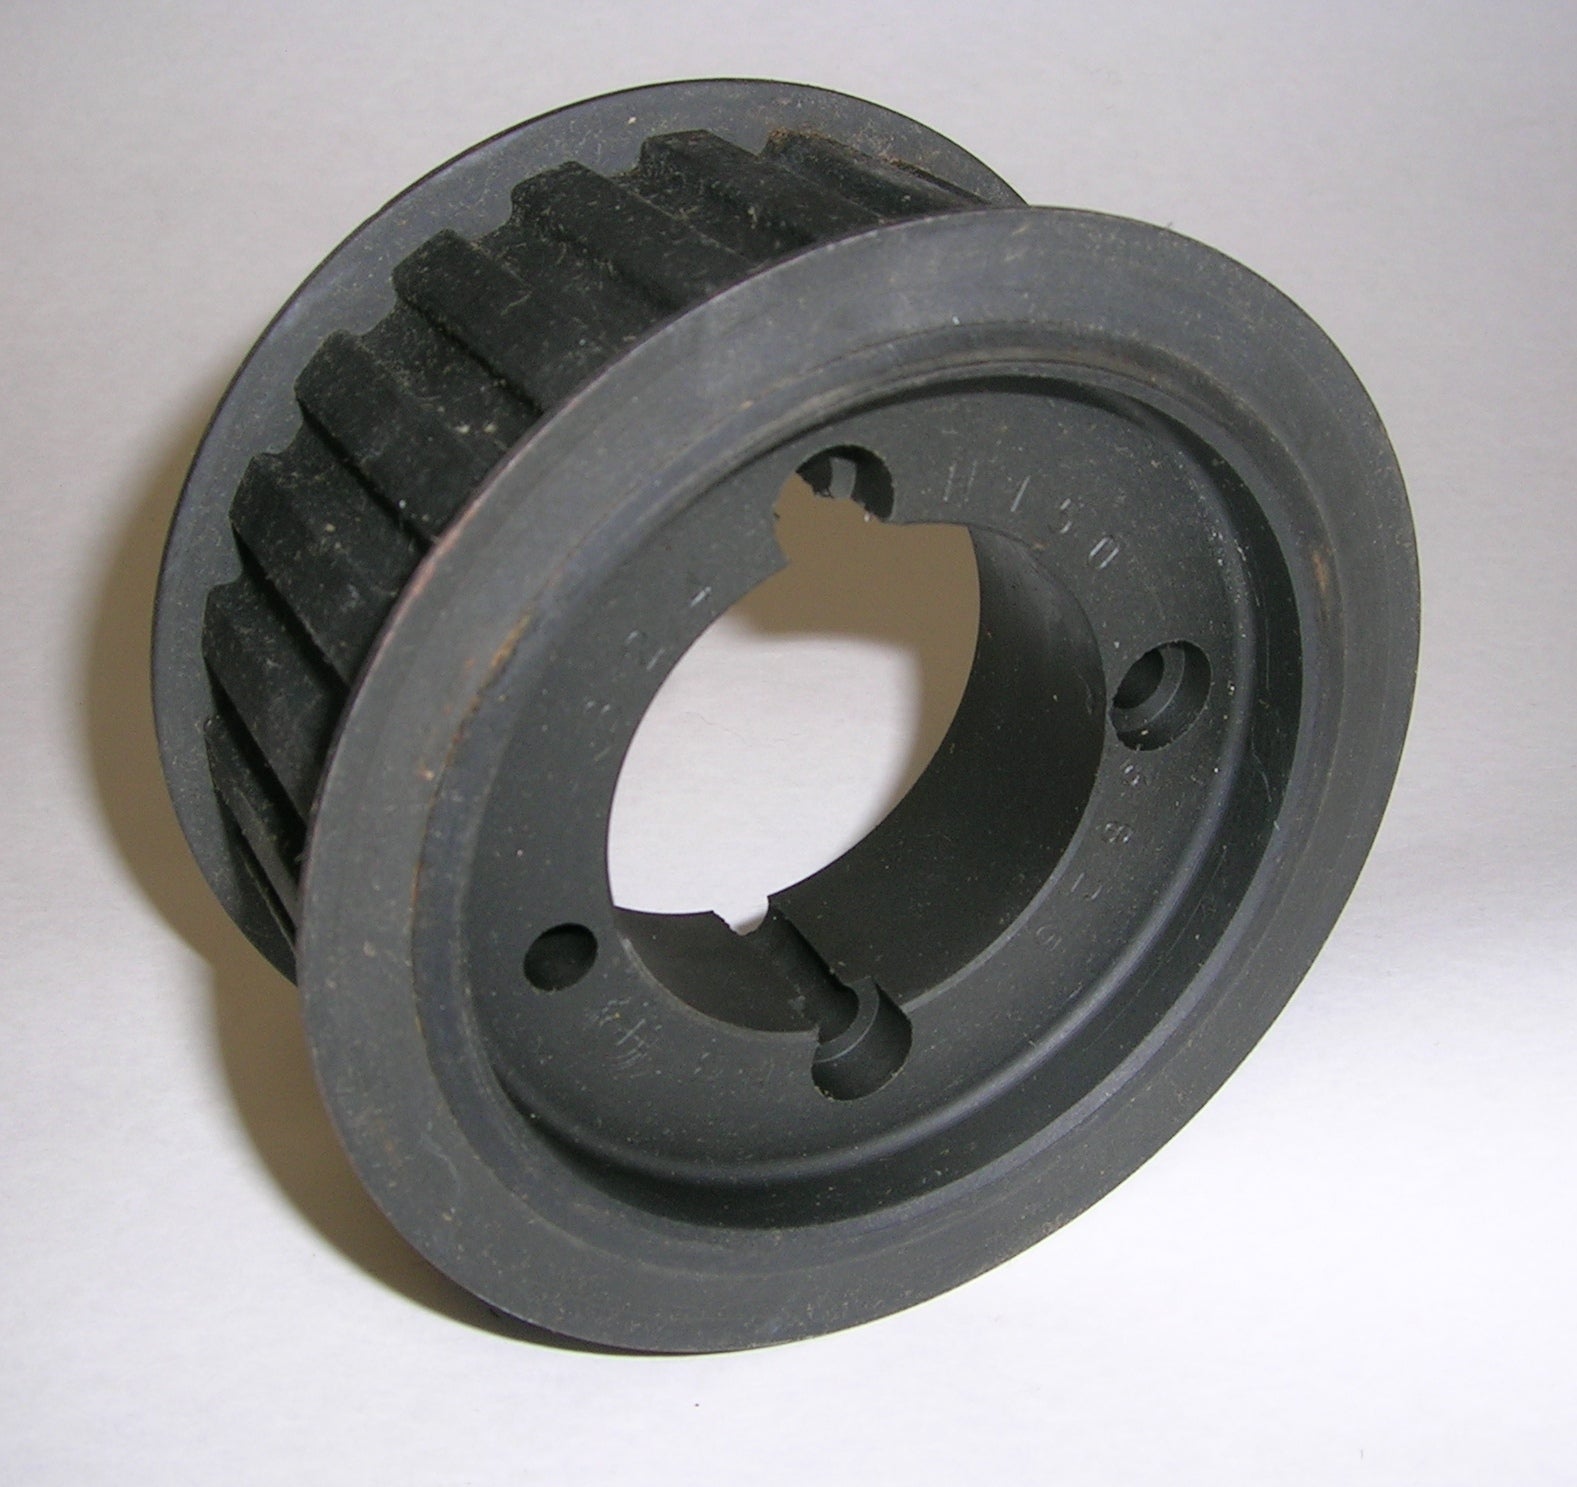 24H150 Steel Timing PULLEY prepaired for 3825 POGGILOCK SYSTEM P TAPER BUSHING, 24 Tooth, H Pitch. POGGI P/N 19C02415P PL24H150-5F